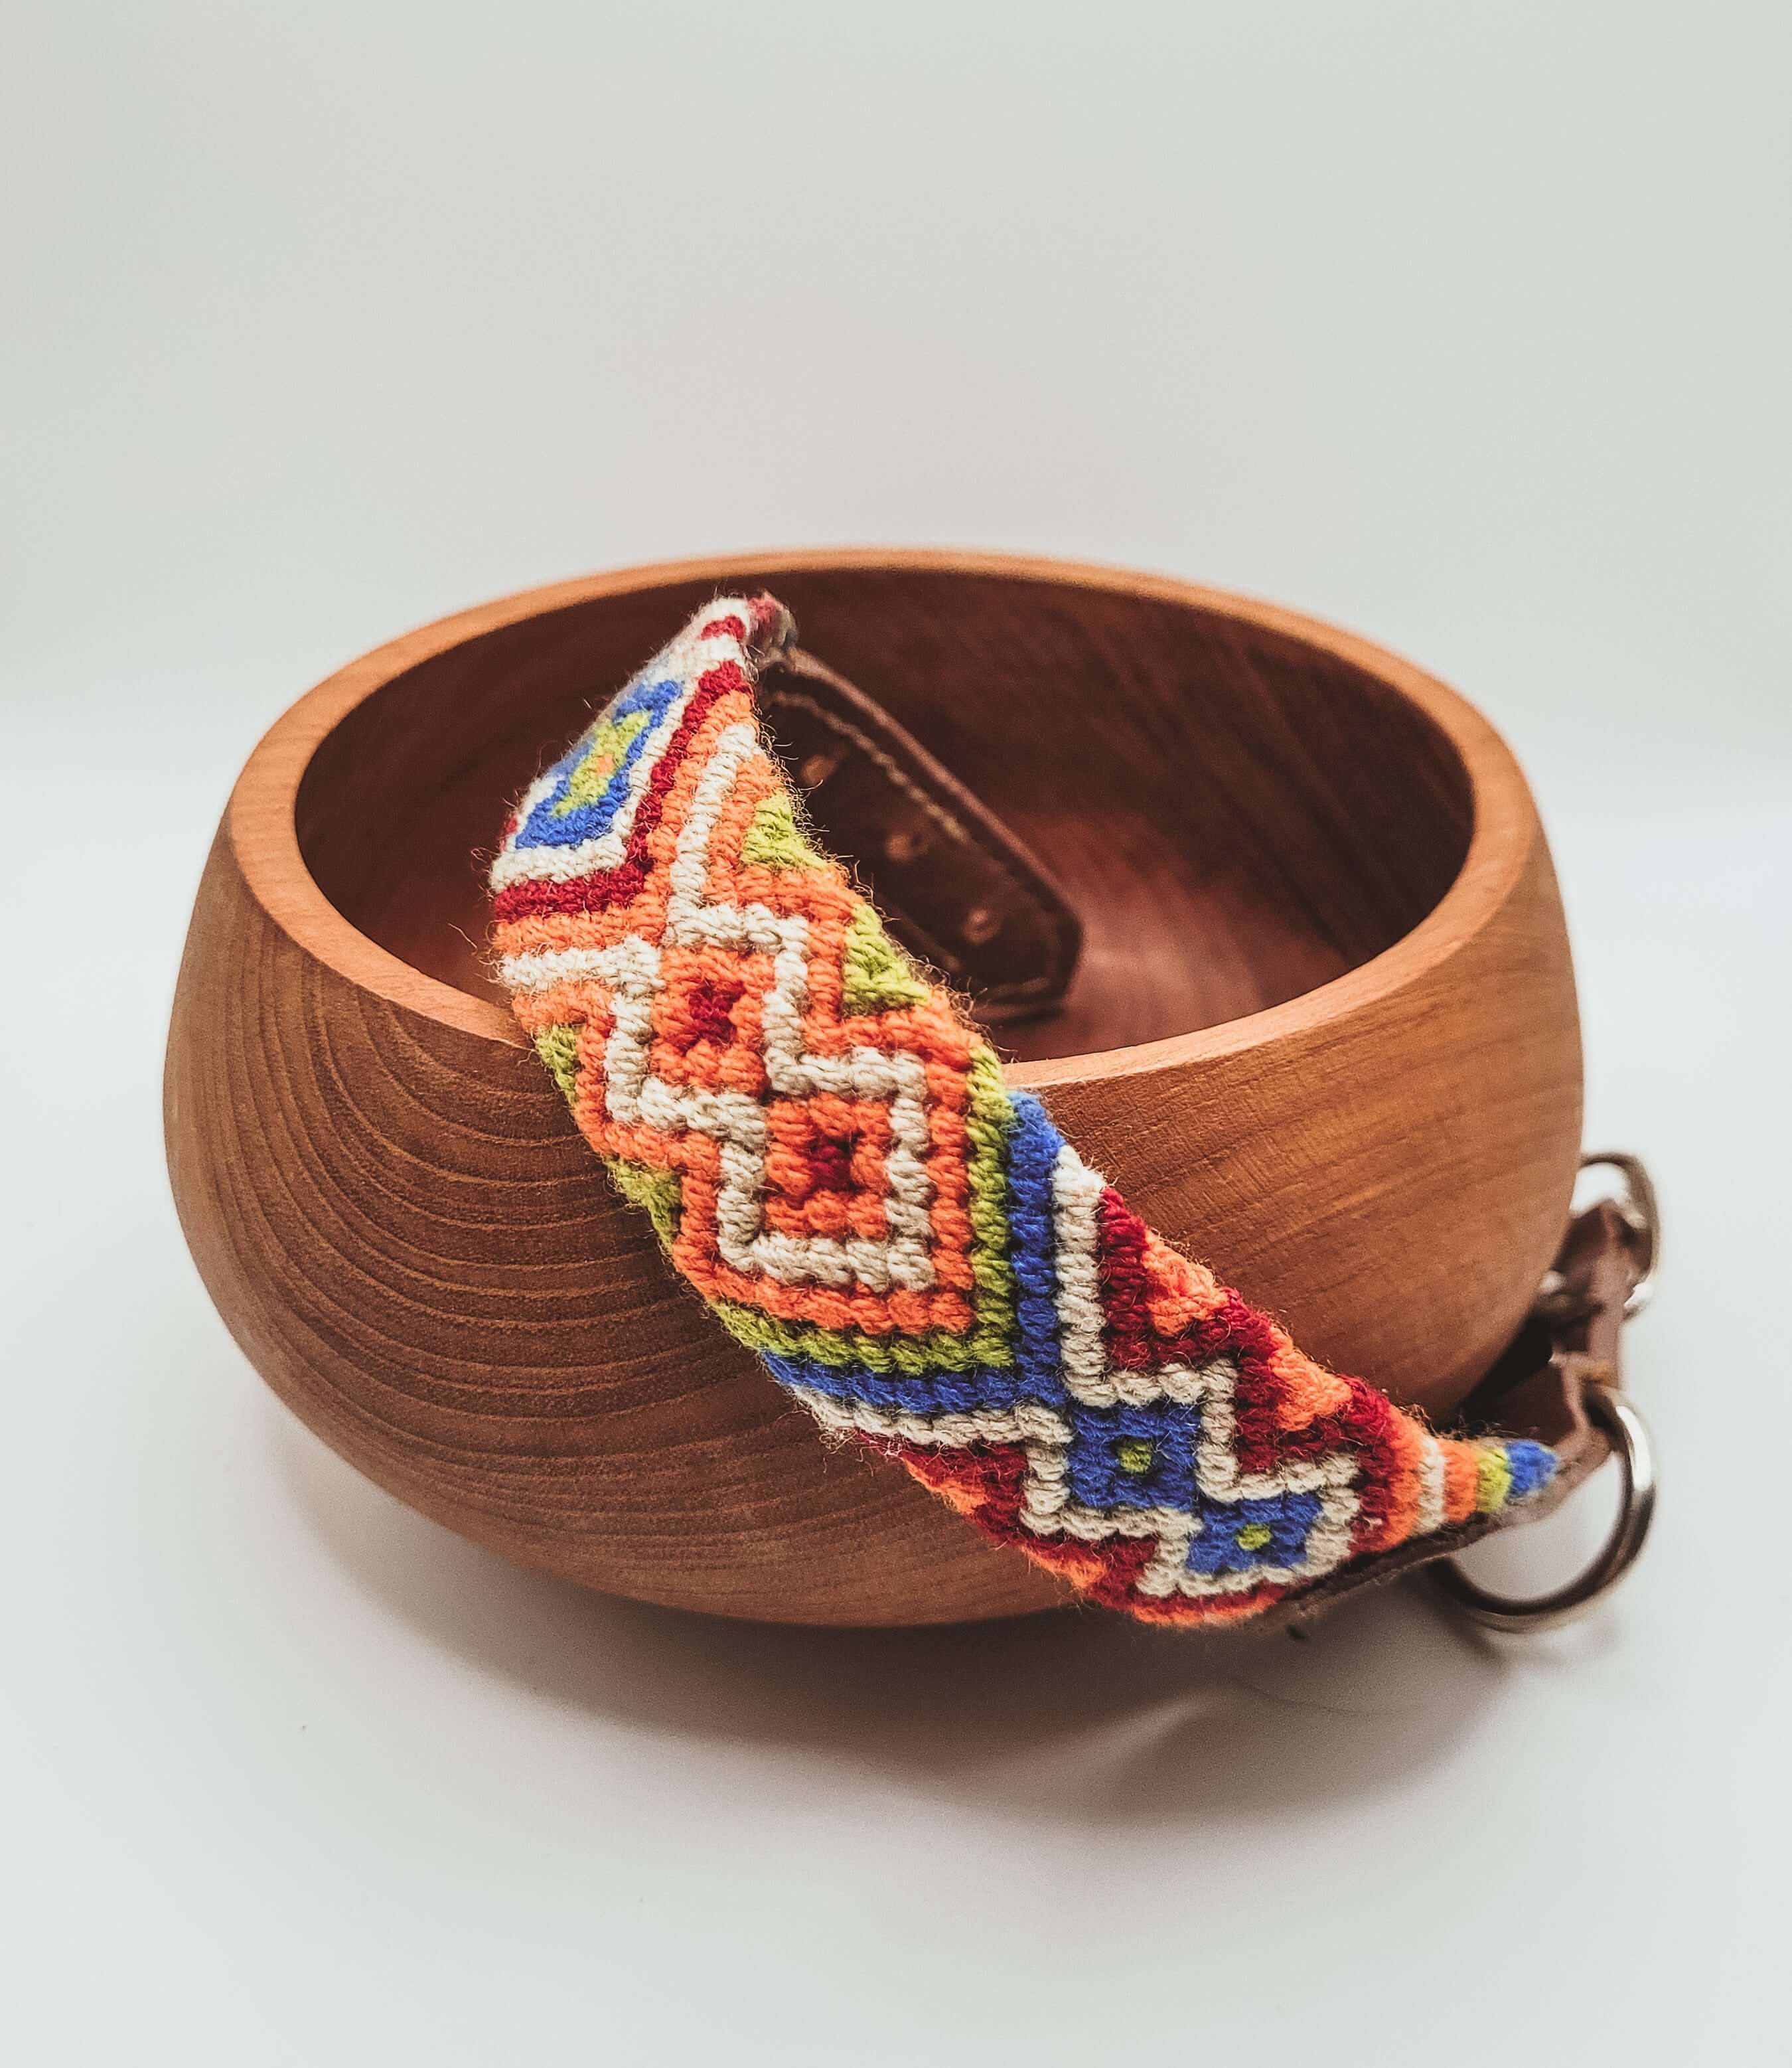 Colourful woven artisan dog colour made by indigenous tribe in Colombia